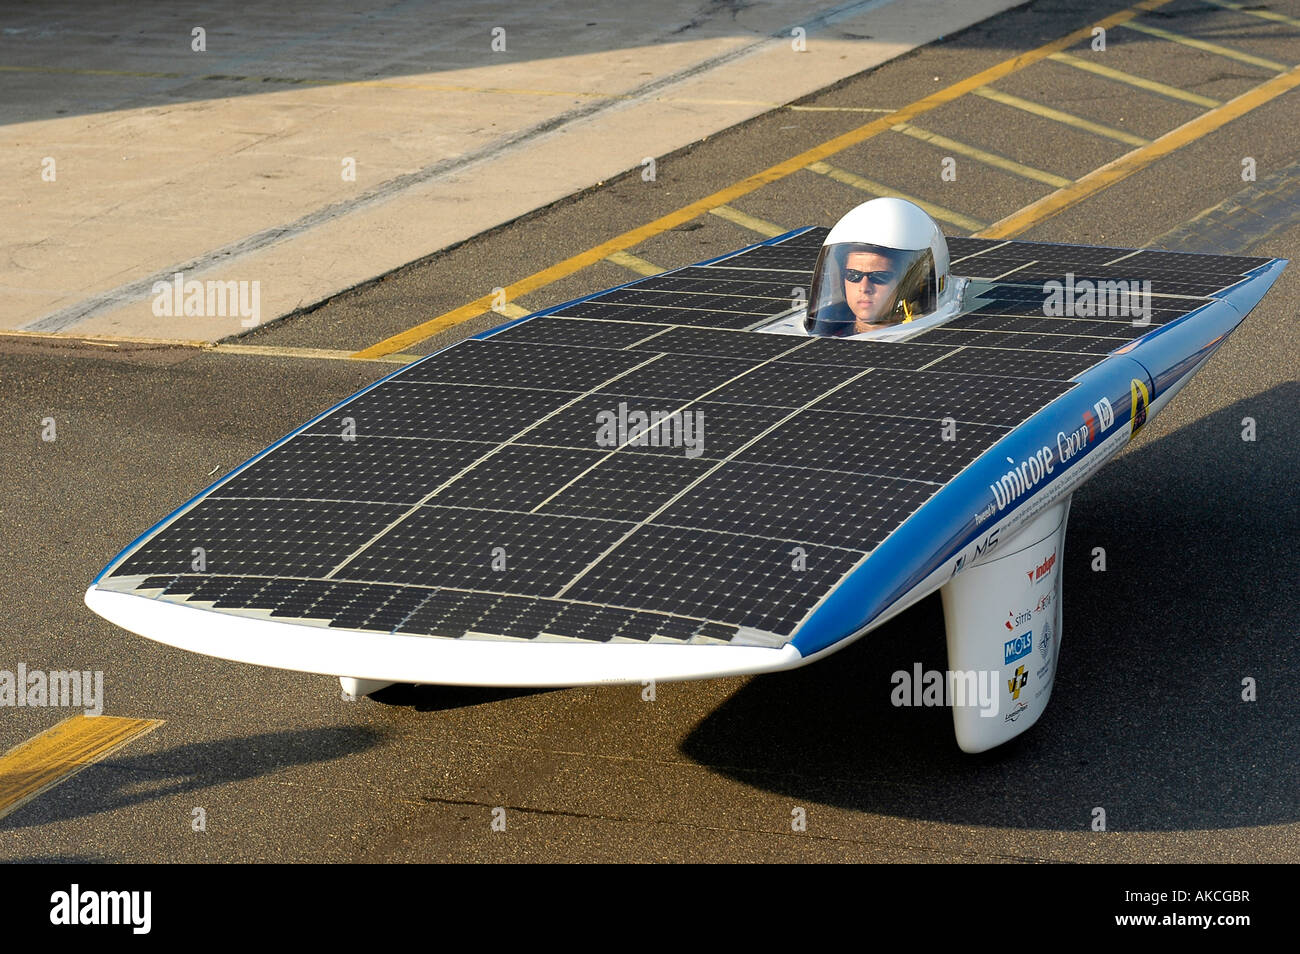 A solar racing car. This vehicle uses photovoltaik technology to convert sunshine into energy through its solar panels. Stock Photo